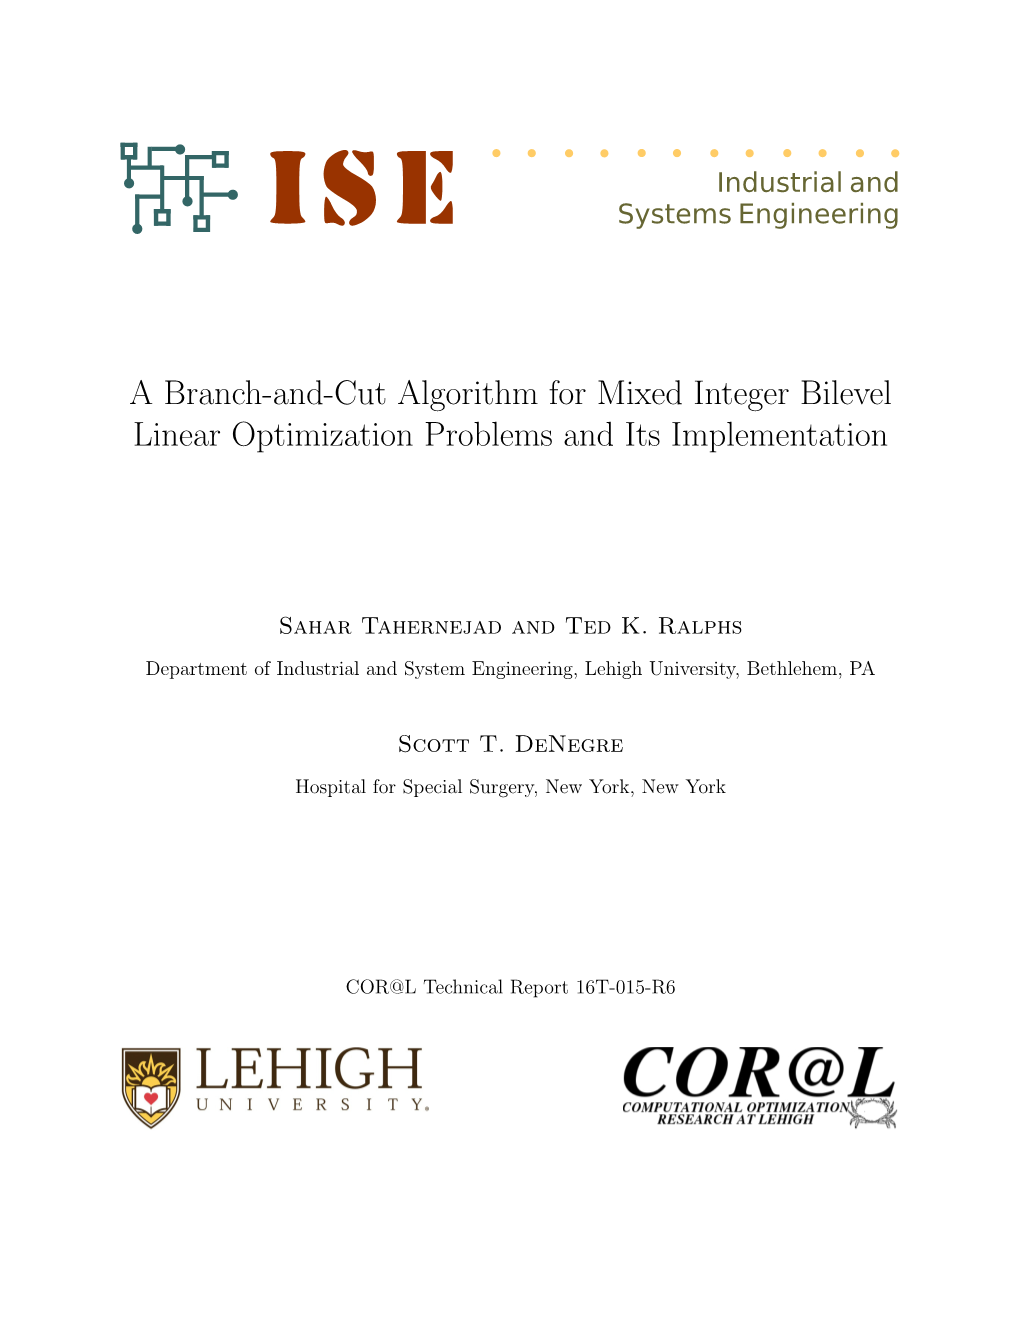 A Branch-And-Cut Algorithm for Mixed Integer Bilevel Linear Optimization Problems and Its Implementation